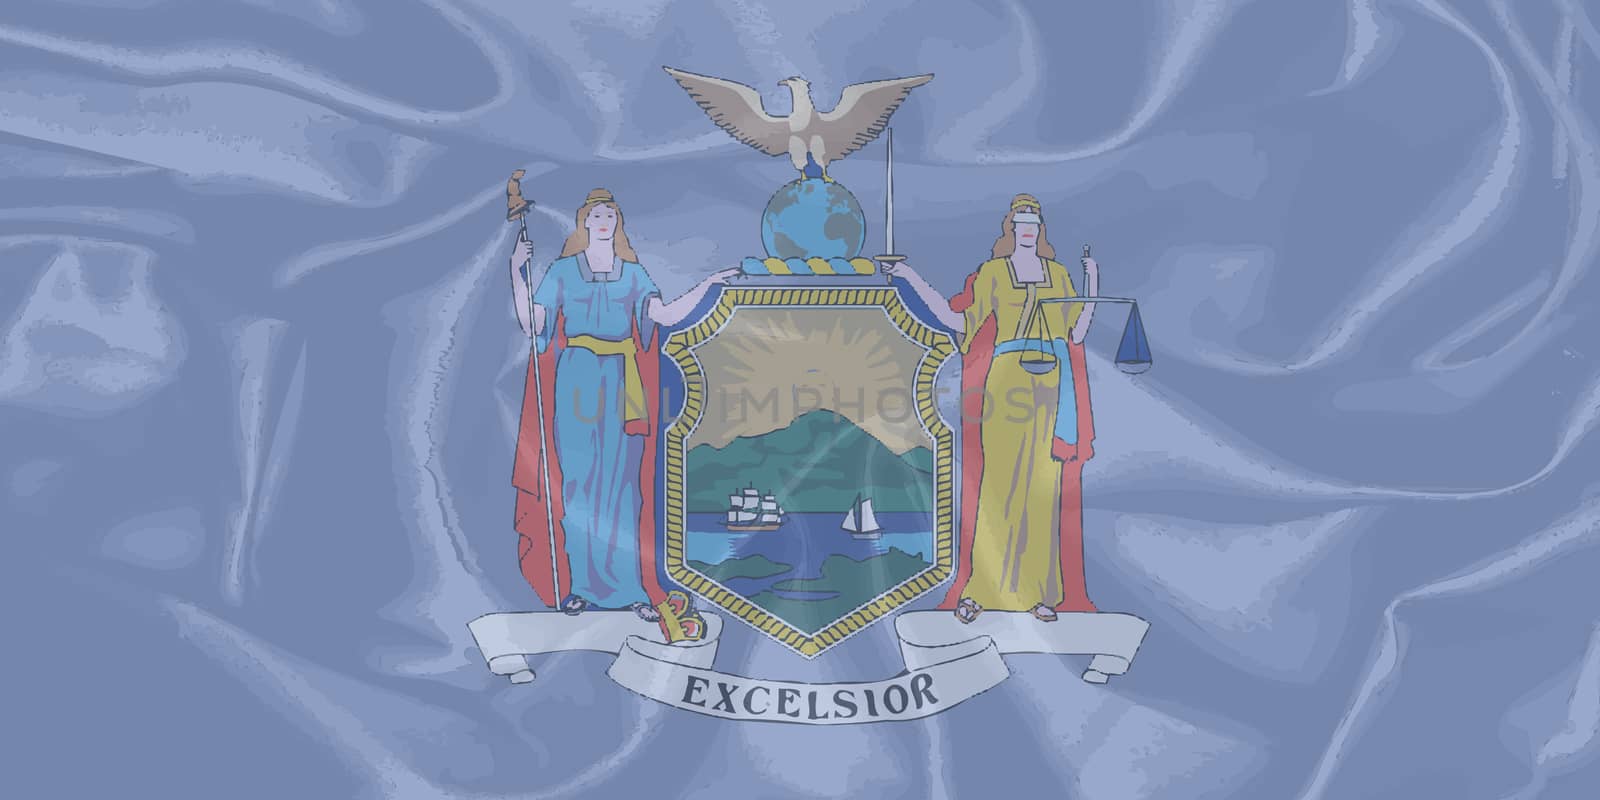 The flag of the state of New York